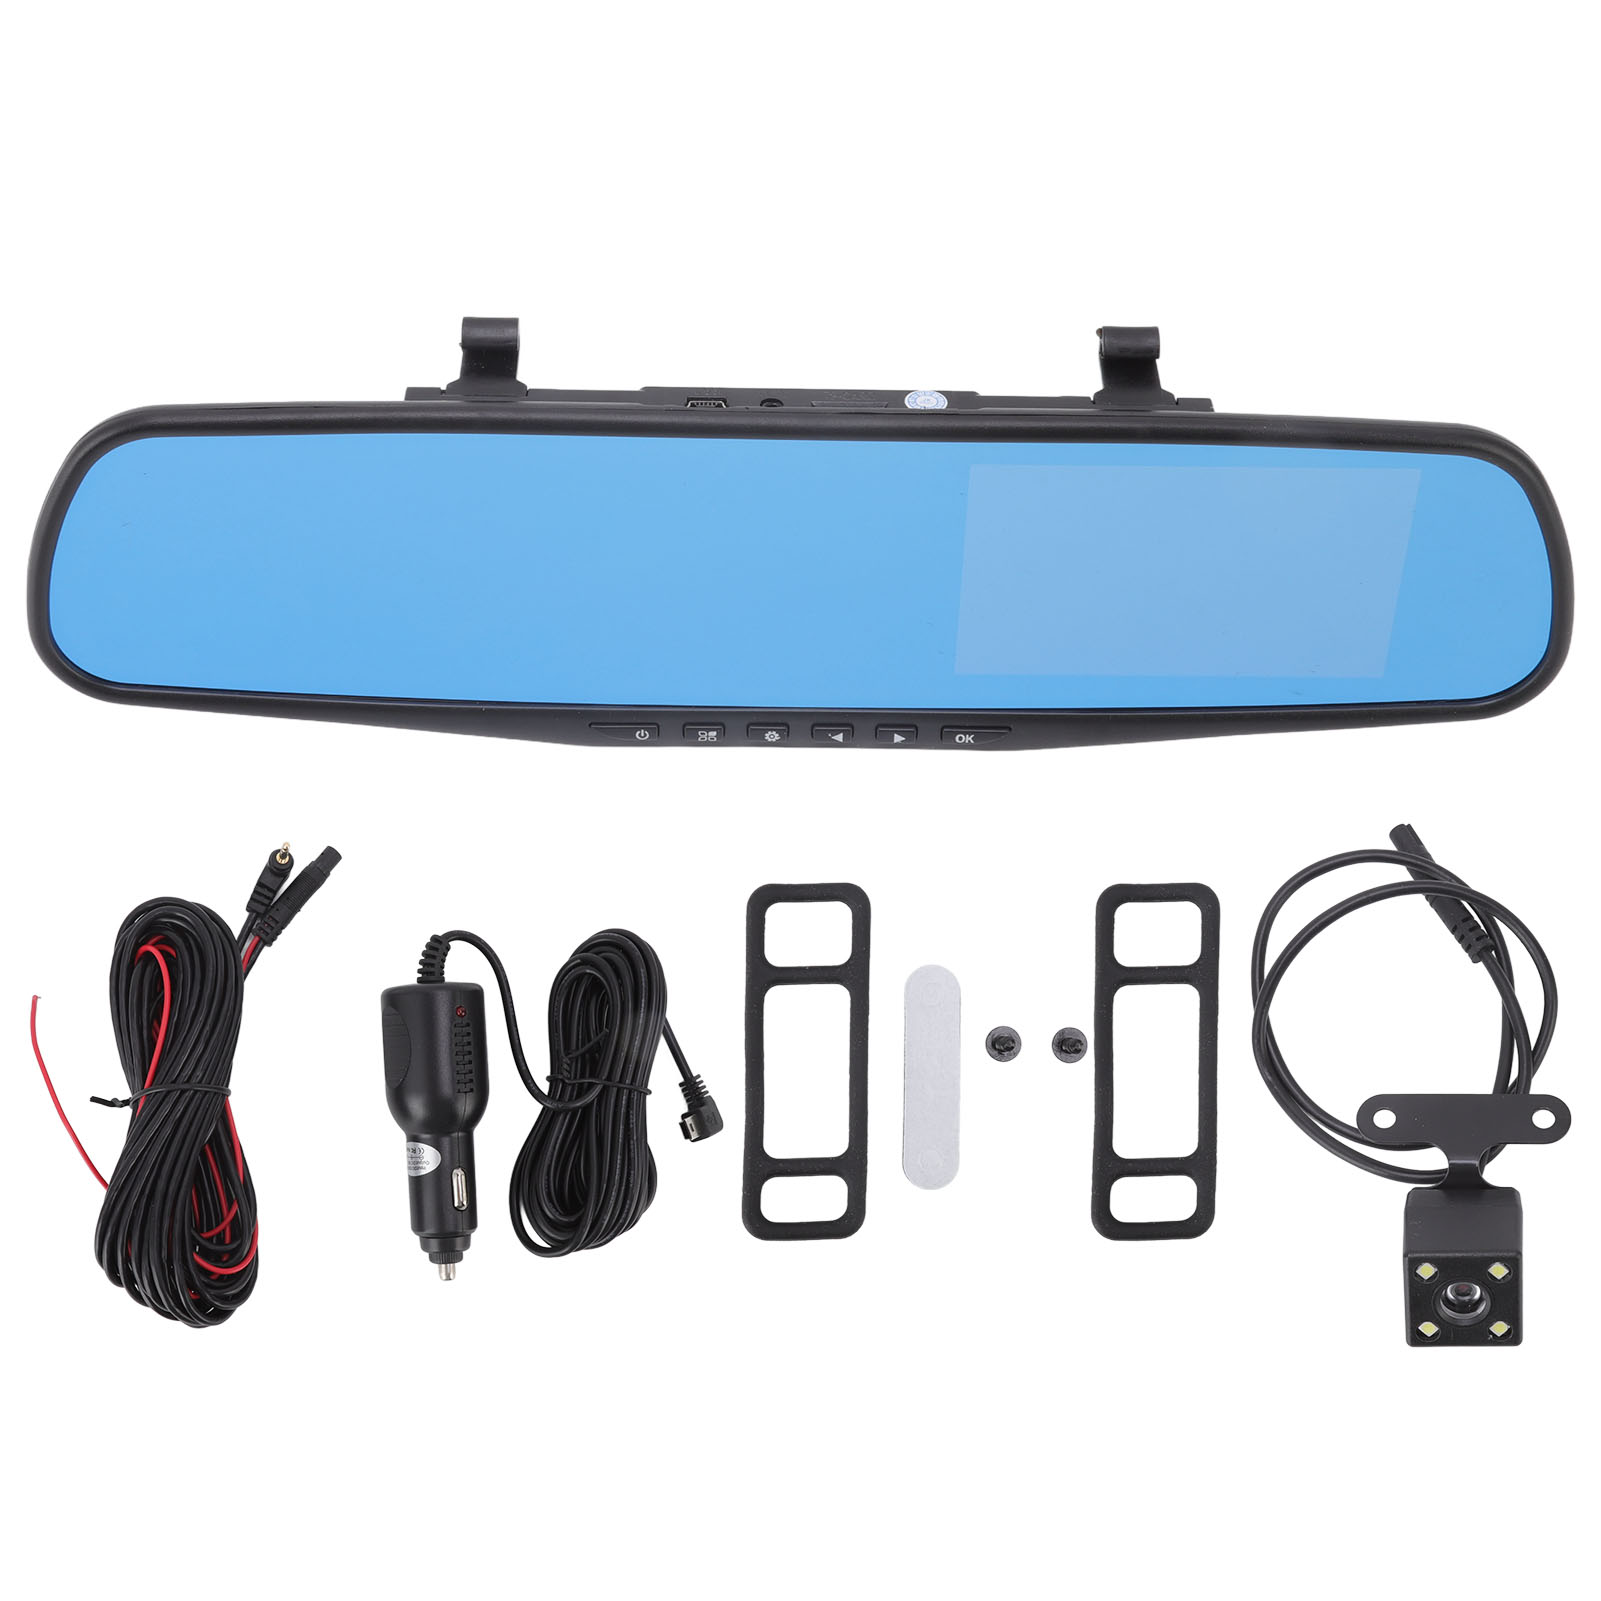 Ccdes Rearview Mirror Monitor,Rearview Mirror DVR,Rearview Mirror Dash Cam 4.3in  Screen 1080p Loop Recording Built In G Sensor Parking Monitoring For Car 